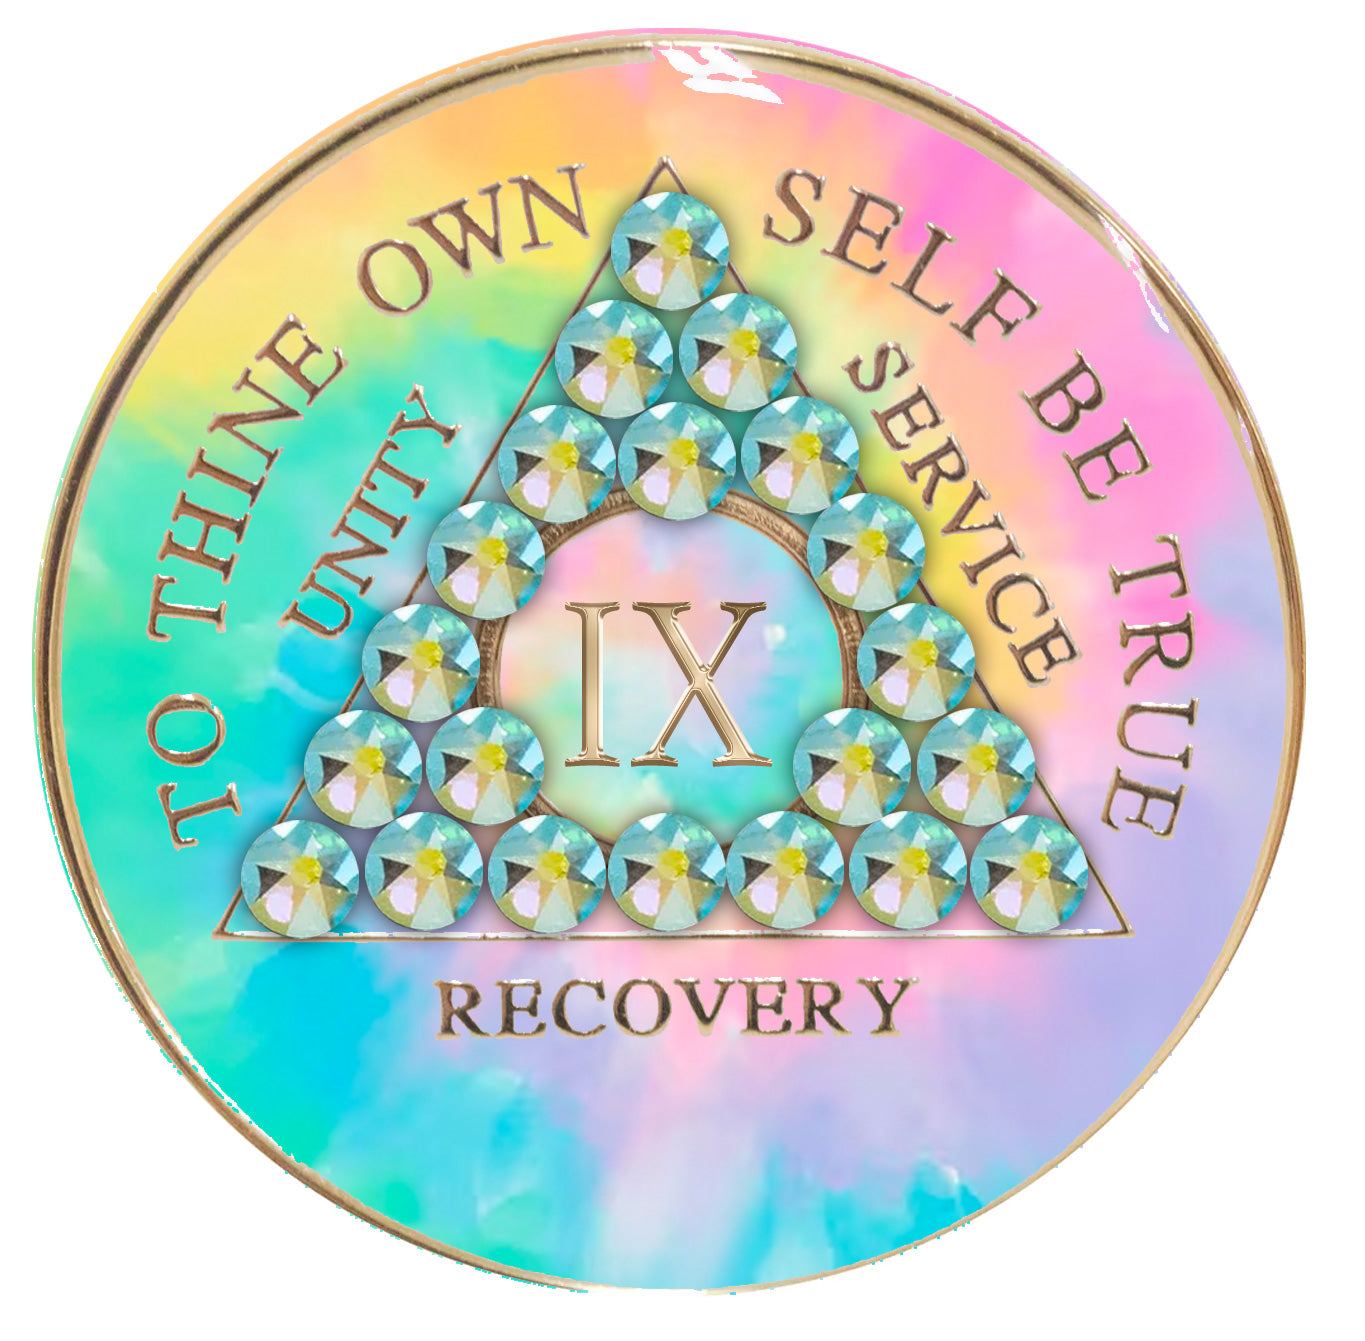 9 year AA medallion pastel tie-dye representing a psychic change that is needed in the recovery journey, with twenty-one Peridot AB genuine crystals, pink, blue, yellow, and green, in the shape of the triangle, with the AA moto and roman numeral embossed in 14k gold-plated brass, the medallion is sealed with resin for a glossy, scratch free finish.